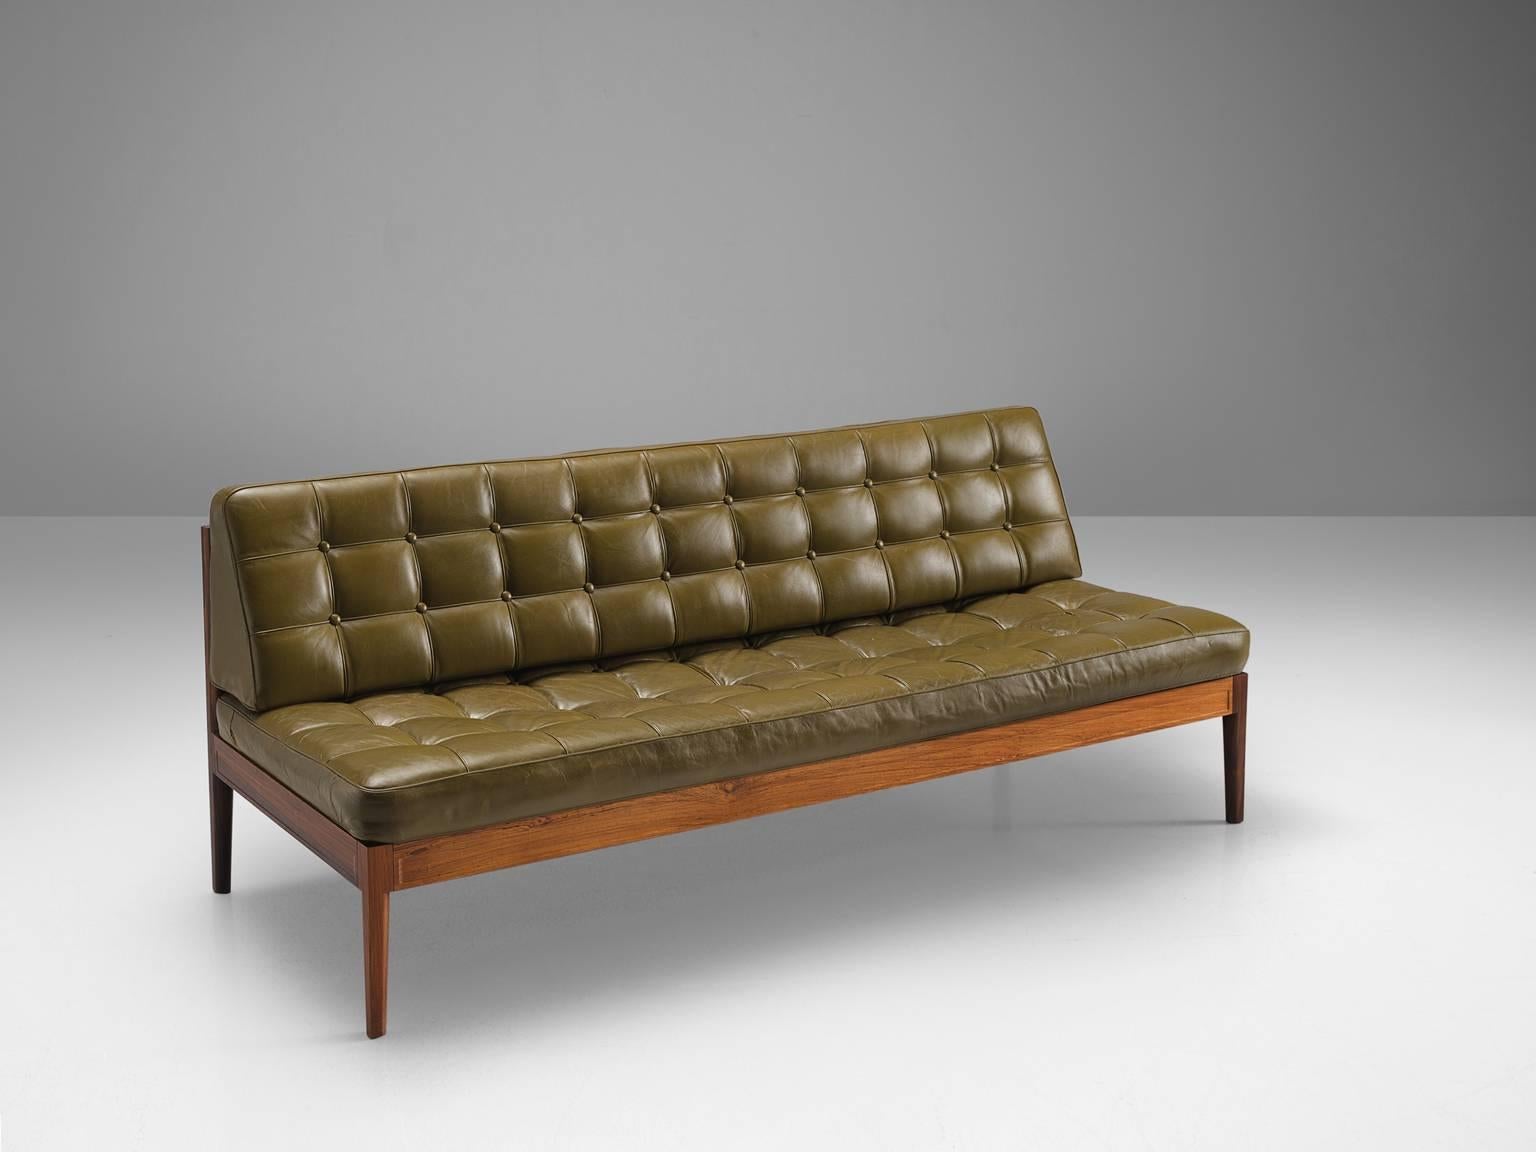 Finn Juhl for France & Søn, 'Diplomat', leather and rosewood, Denmark, 1960s

This solemn rosewood bench is upholstered with an olive green tufted seat and back. The sofa is part of the 'Diplomat' series by the Dane Finn Juhl. The design is both